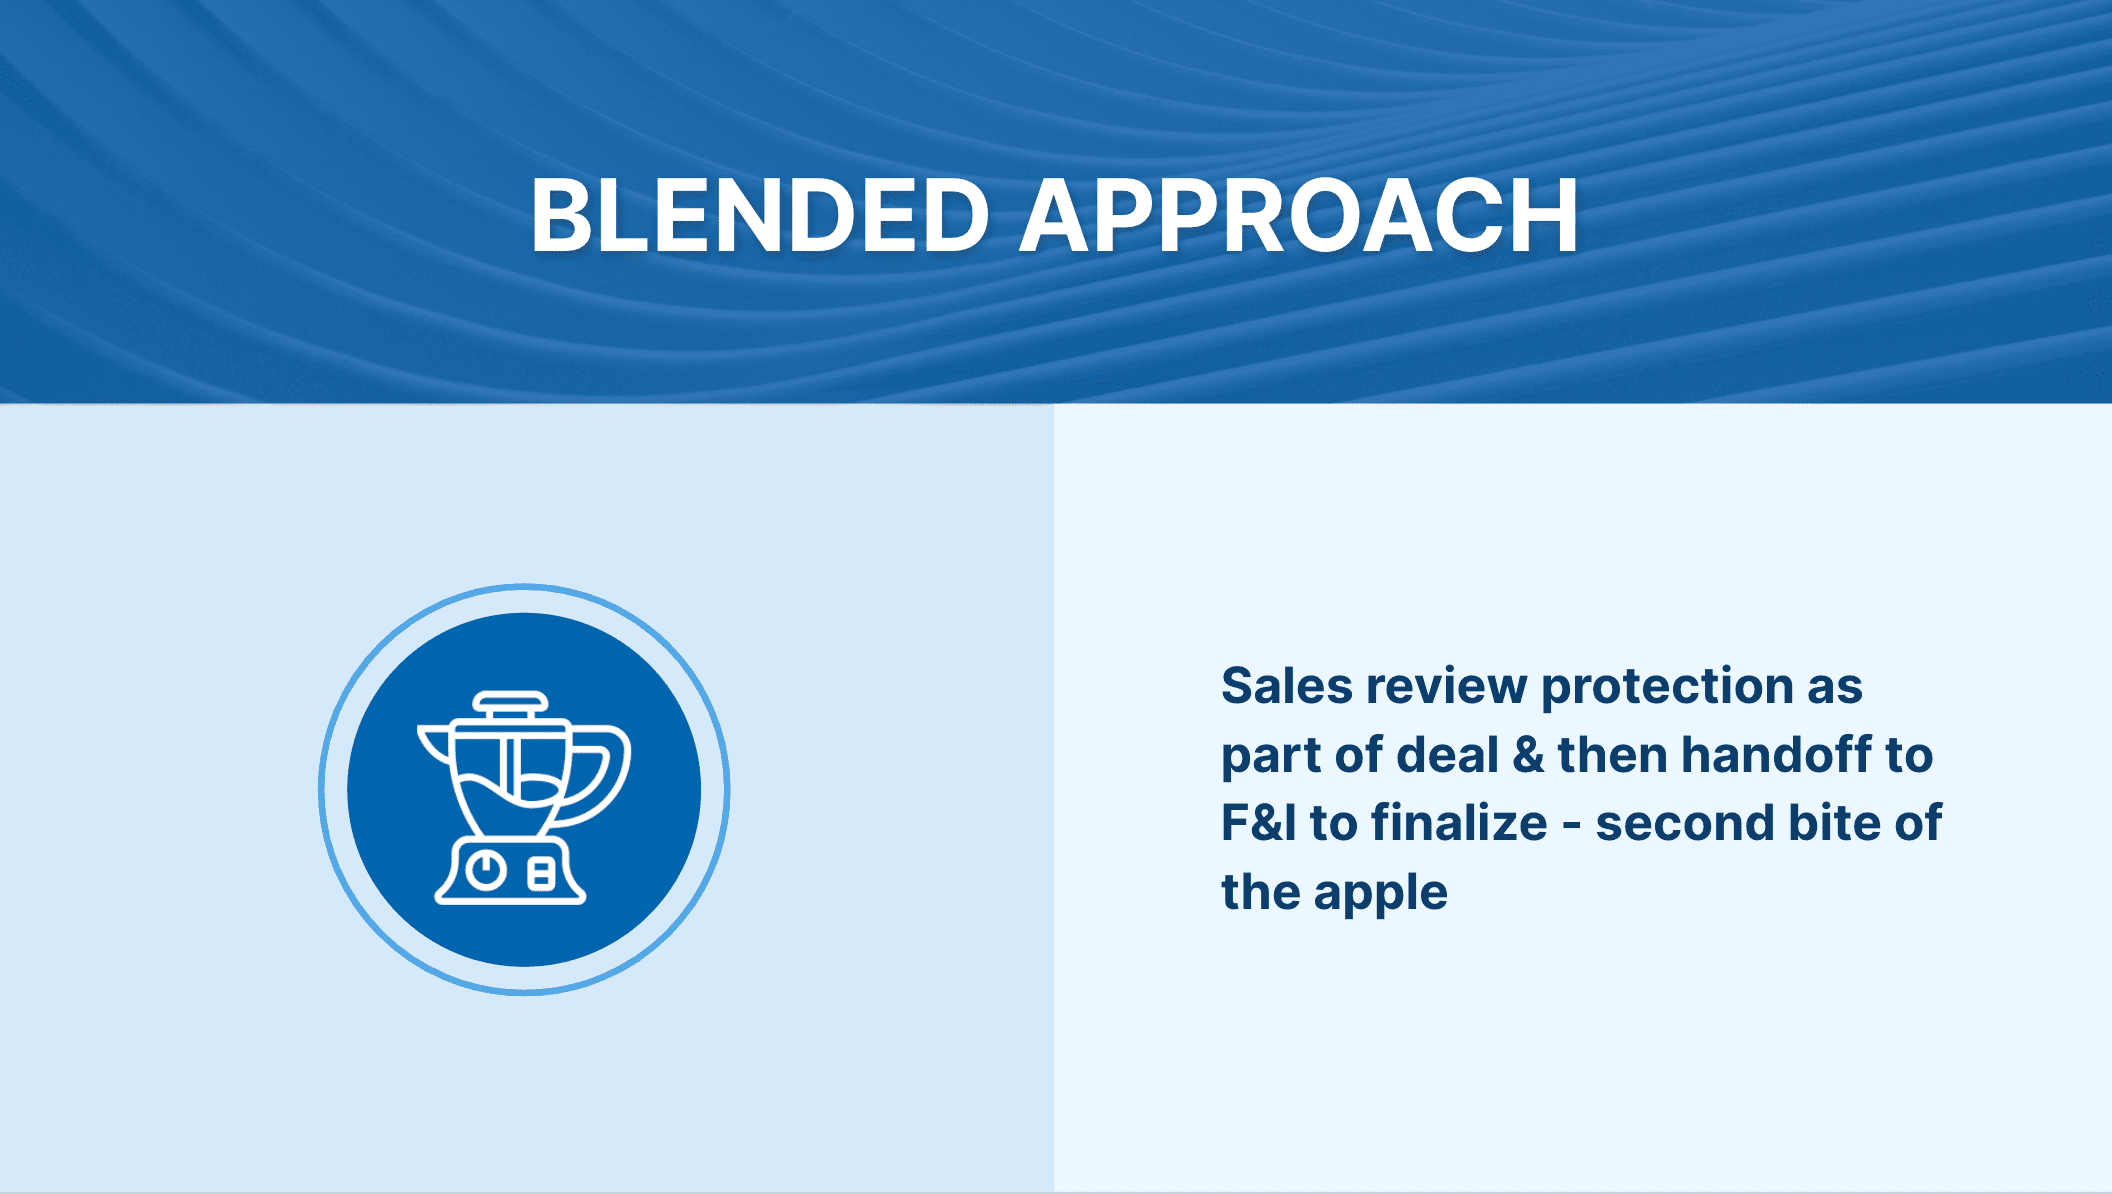 Blended Approach